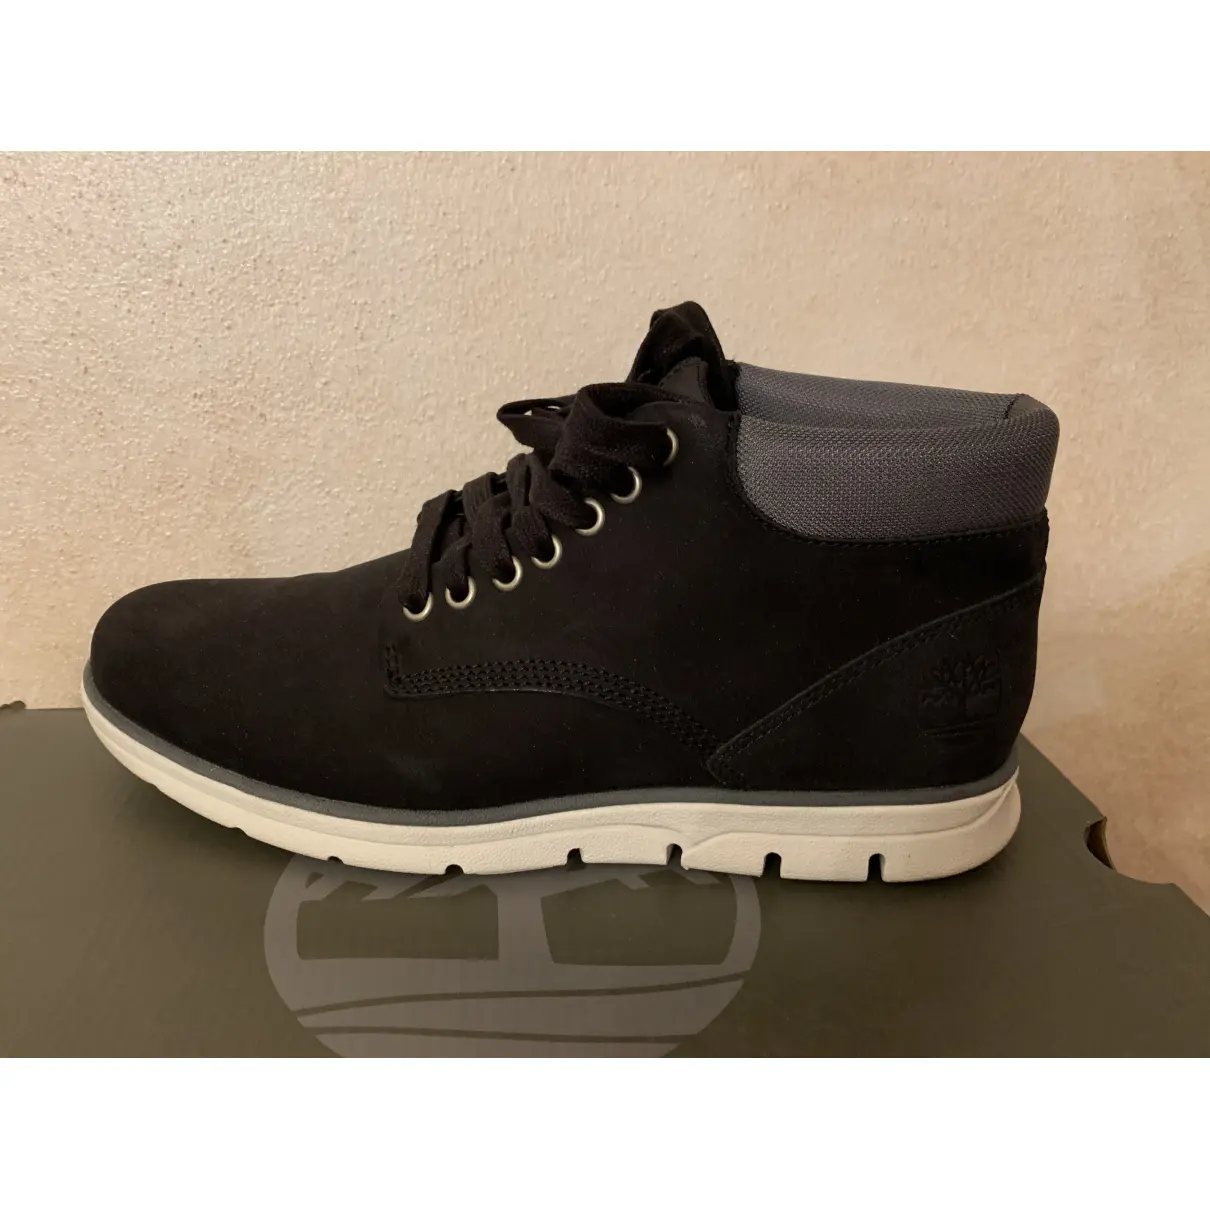 Buy Timberland Black Suede Boots online